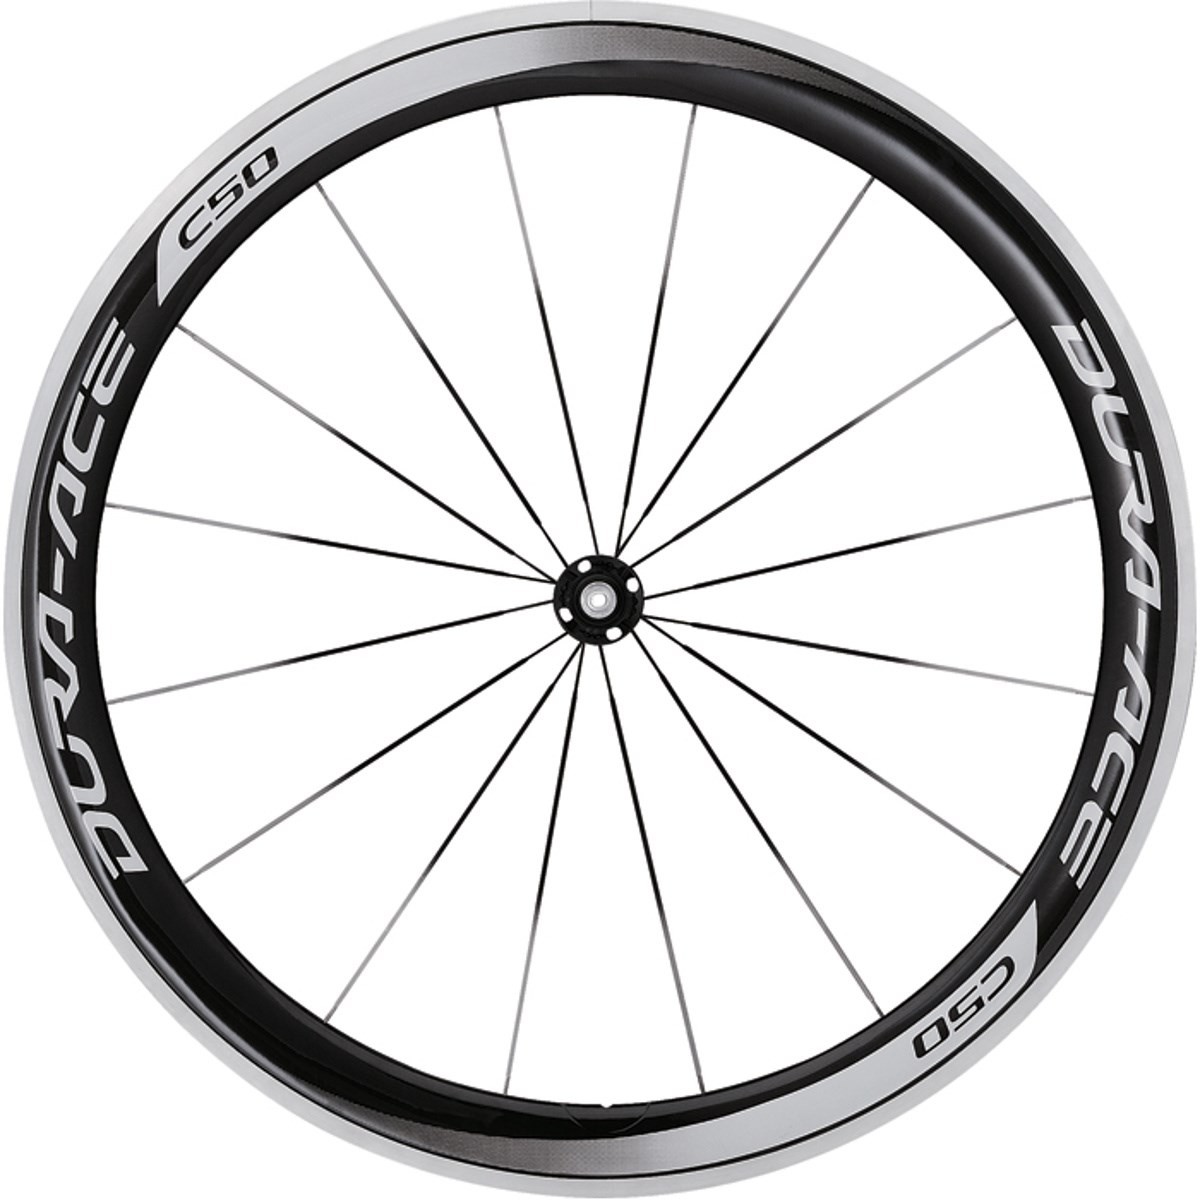 Shimano WH-9000 Dura-Ace C50-CL Carbon Clincher 50mm Front Road Wheel